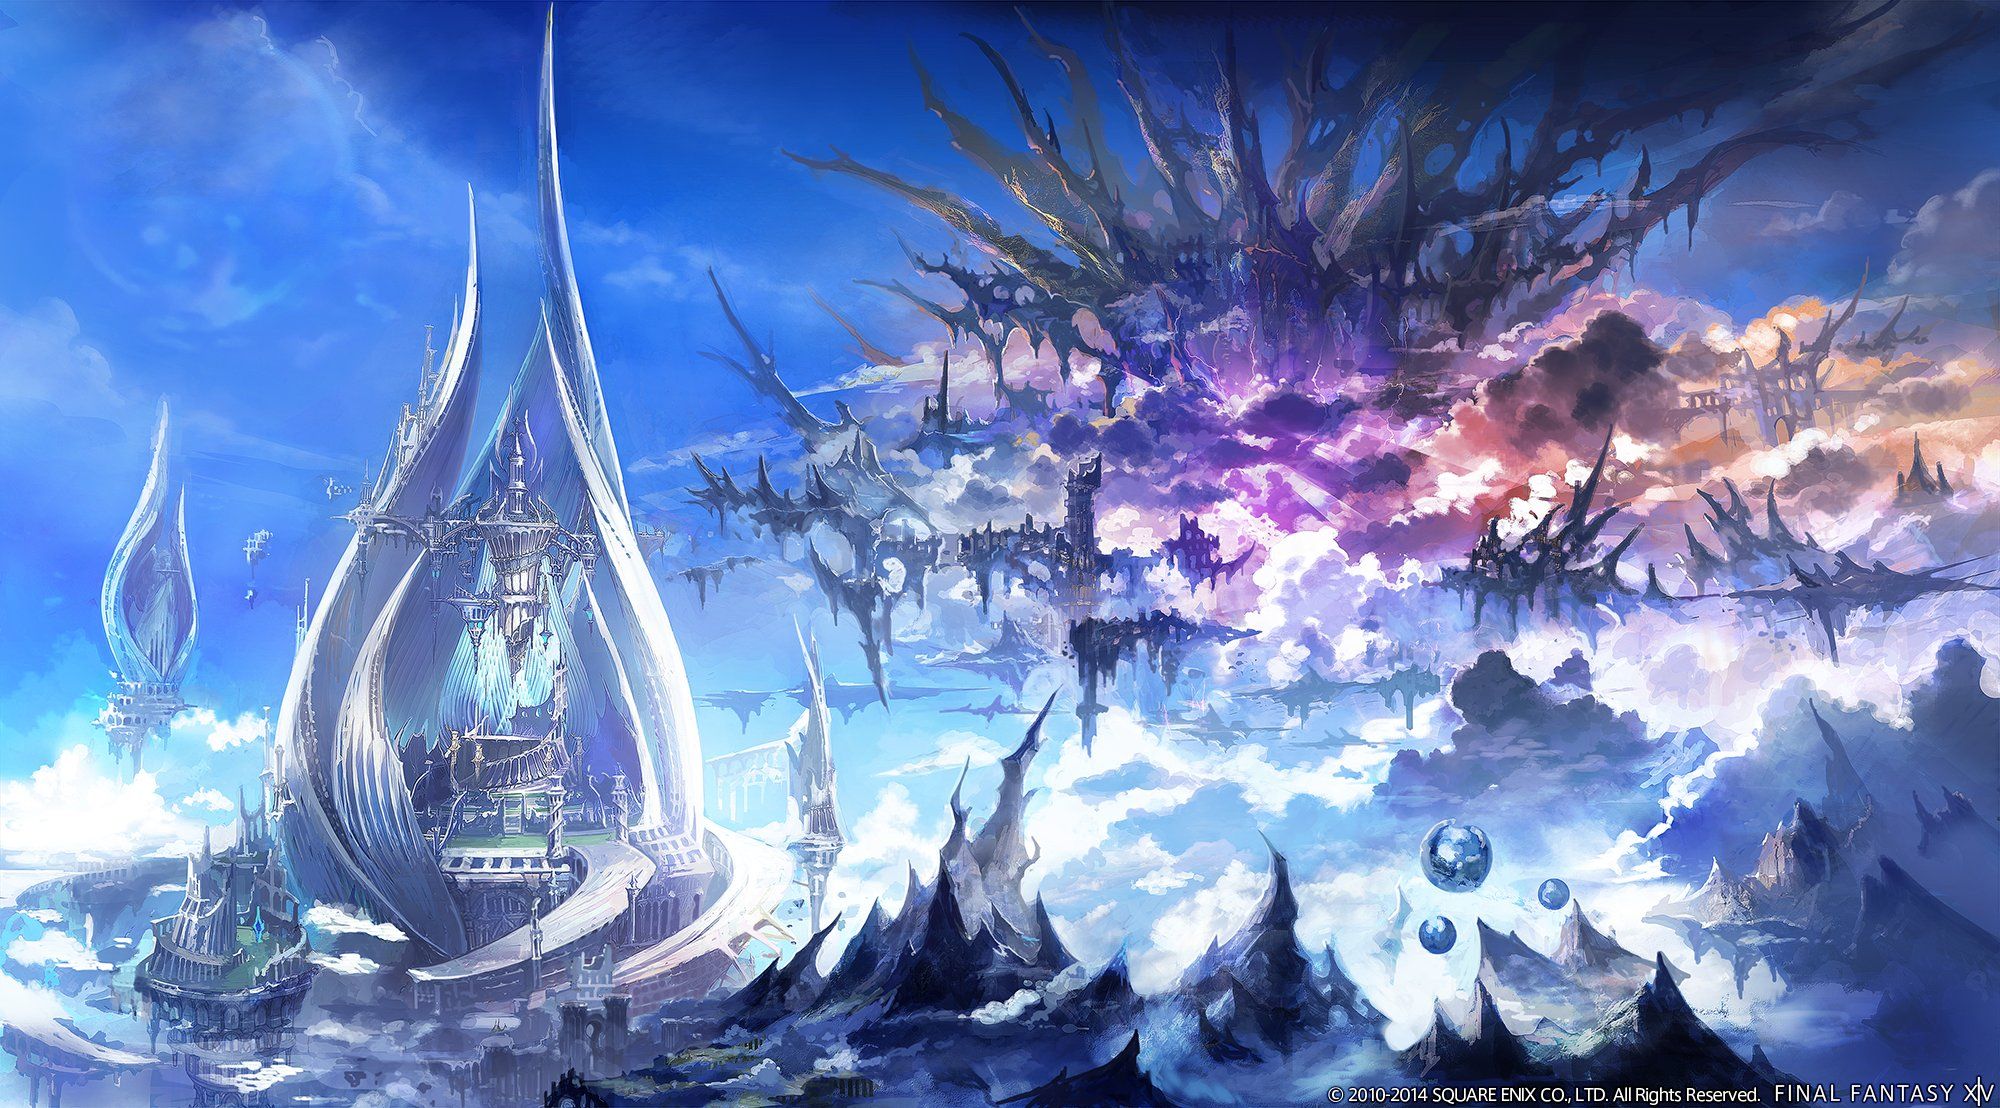 FINAL FANTASY XIV Marks Its 10th Anniversary with a Grand 14-Hour Broadcast!